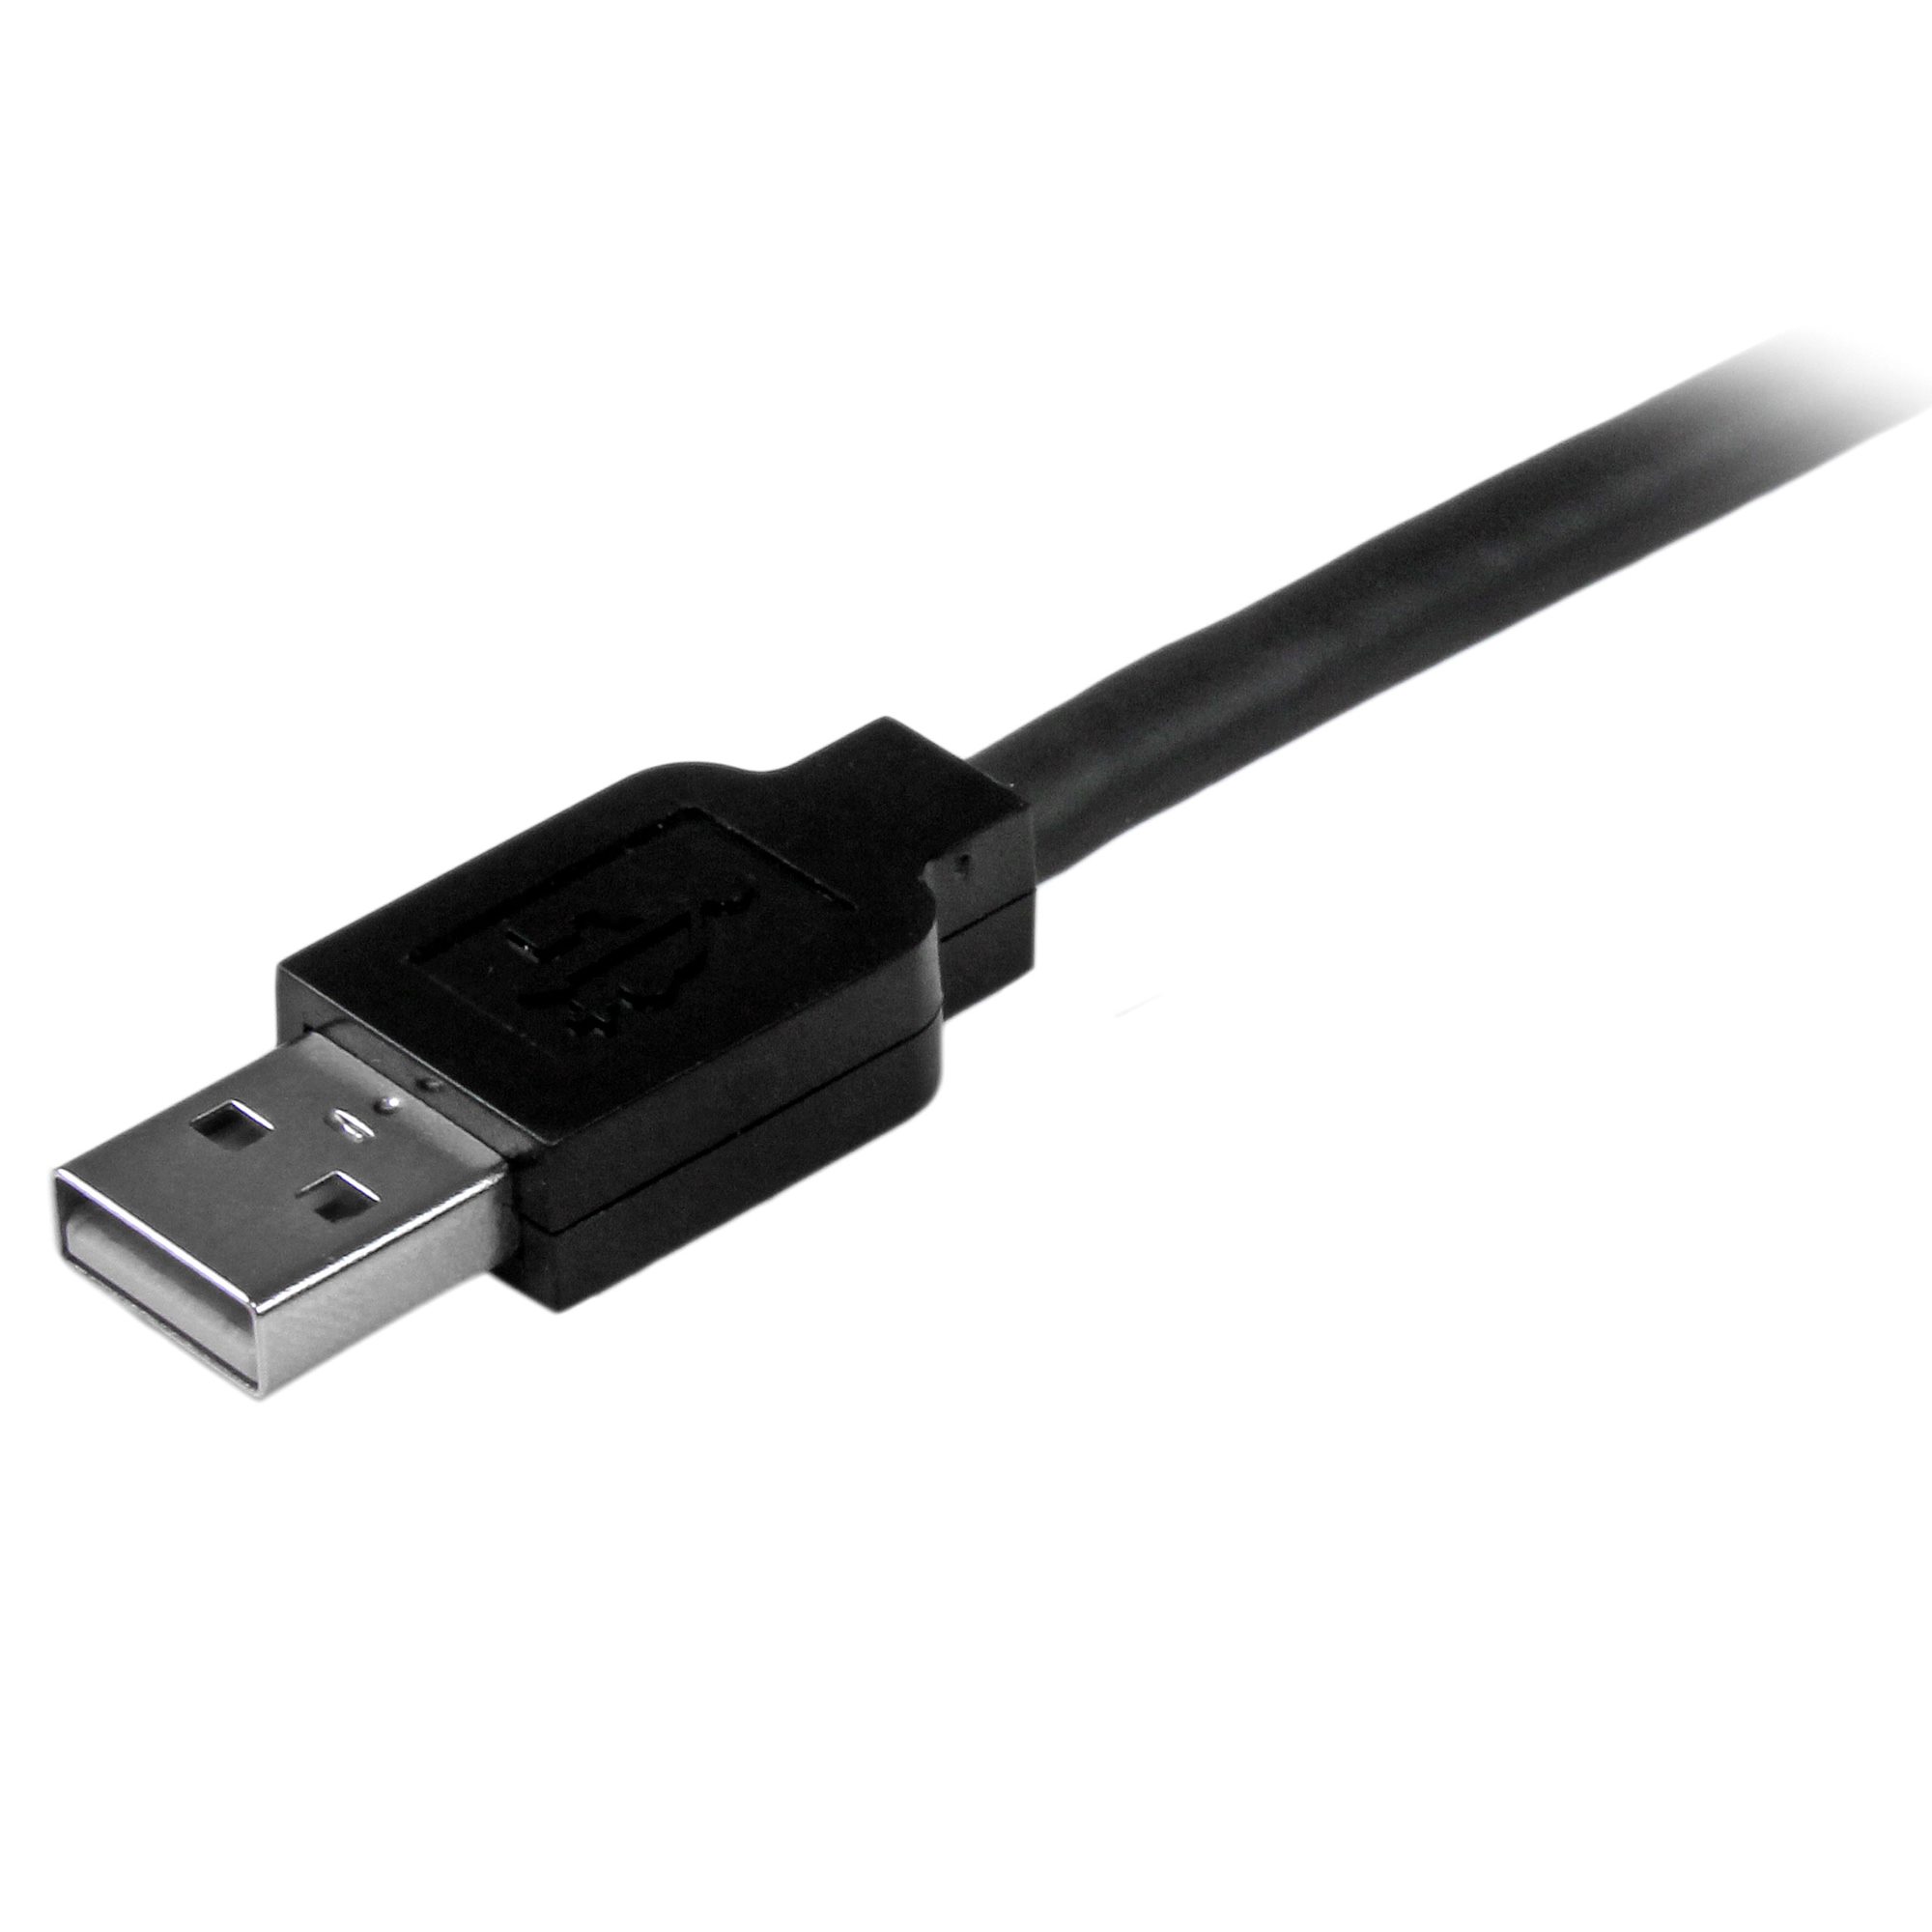 Active MyCableMart 50ft USB 2.0 Plenum Type A Male to A Female Cable Black